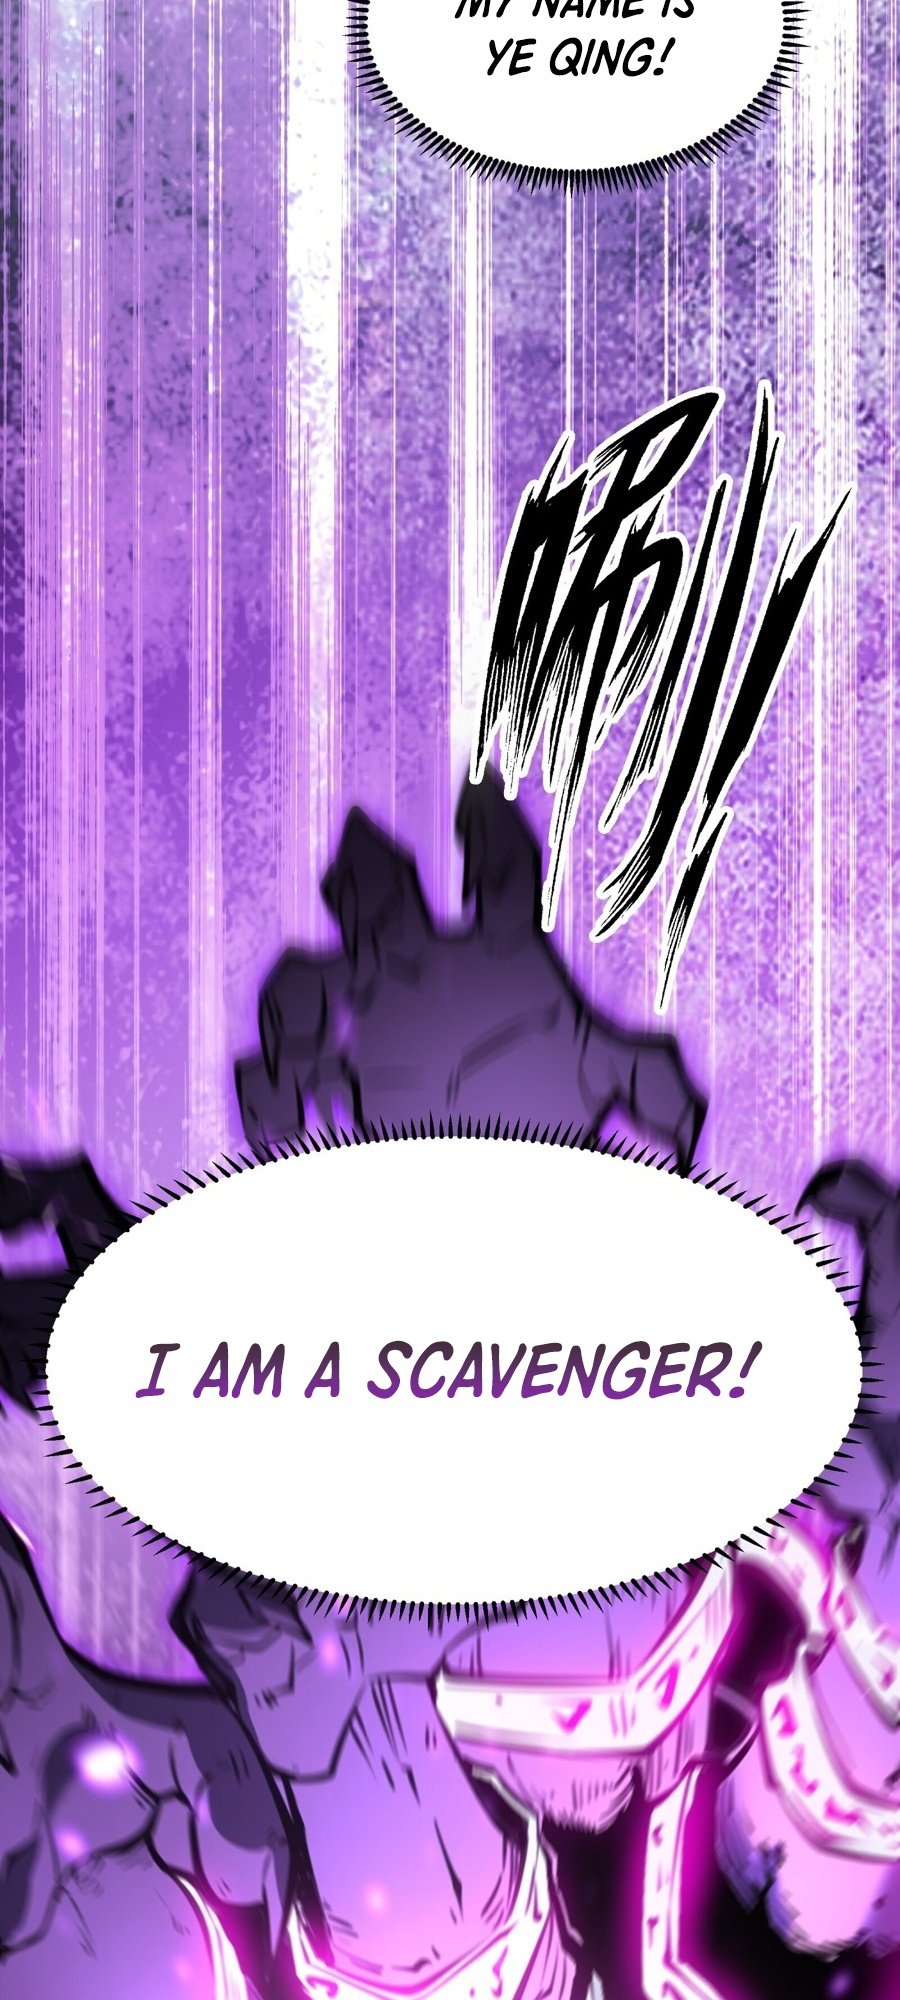 I Became The King by Scavenging, Chapter 3 image 93